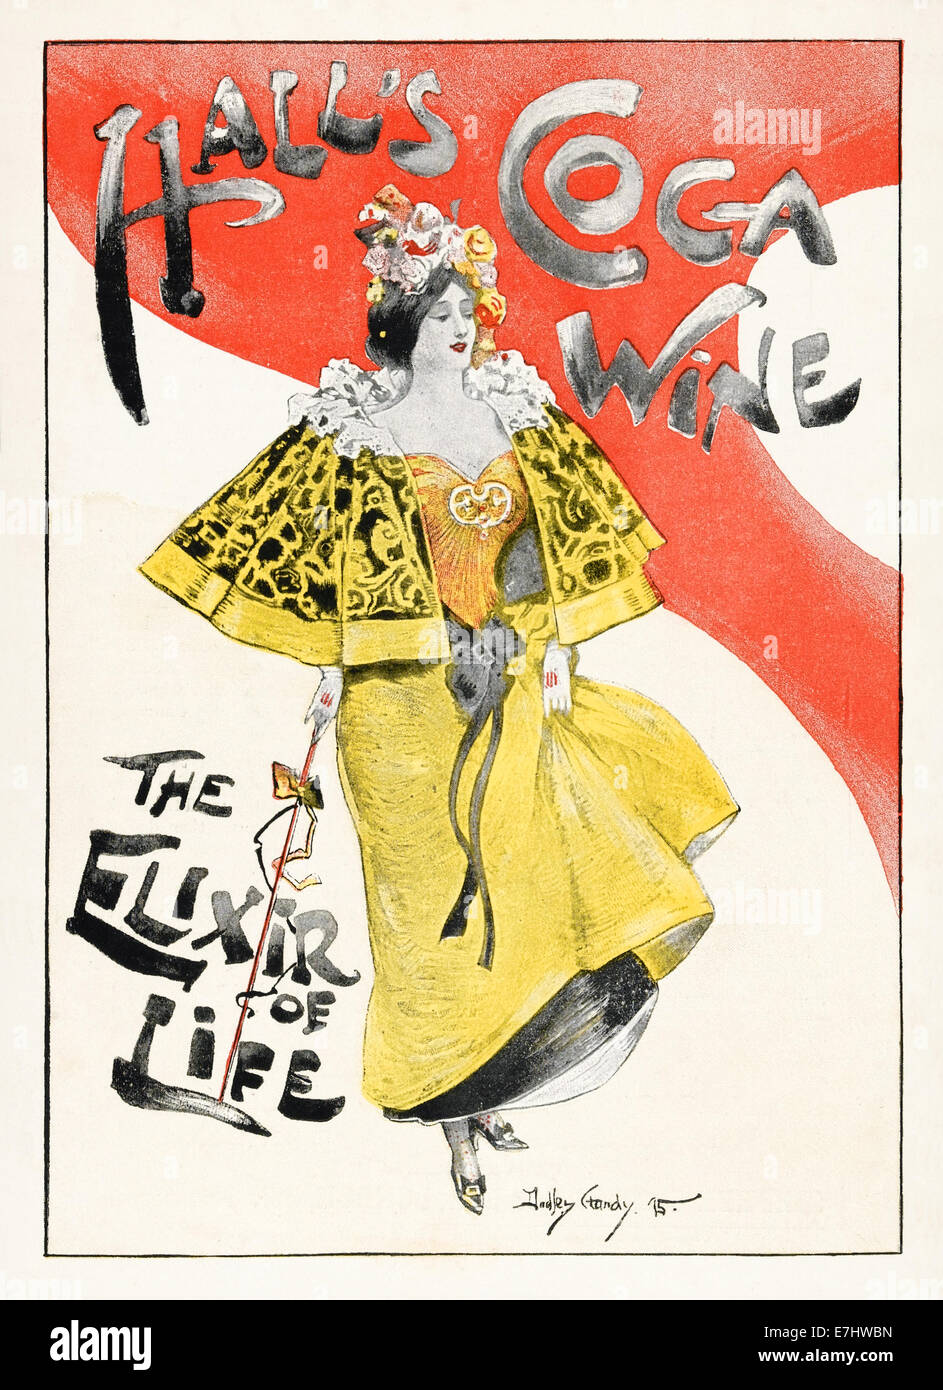 'Hall’s Coca Wine. The Elixir of Life.' Print advertisement by Dudley Hardy See description for more information. Stock Photo